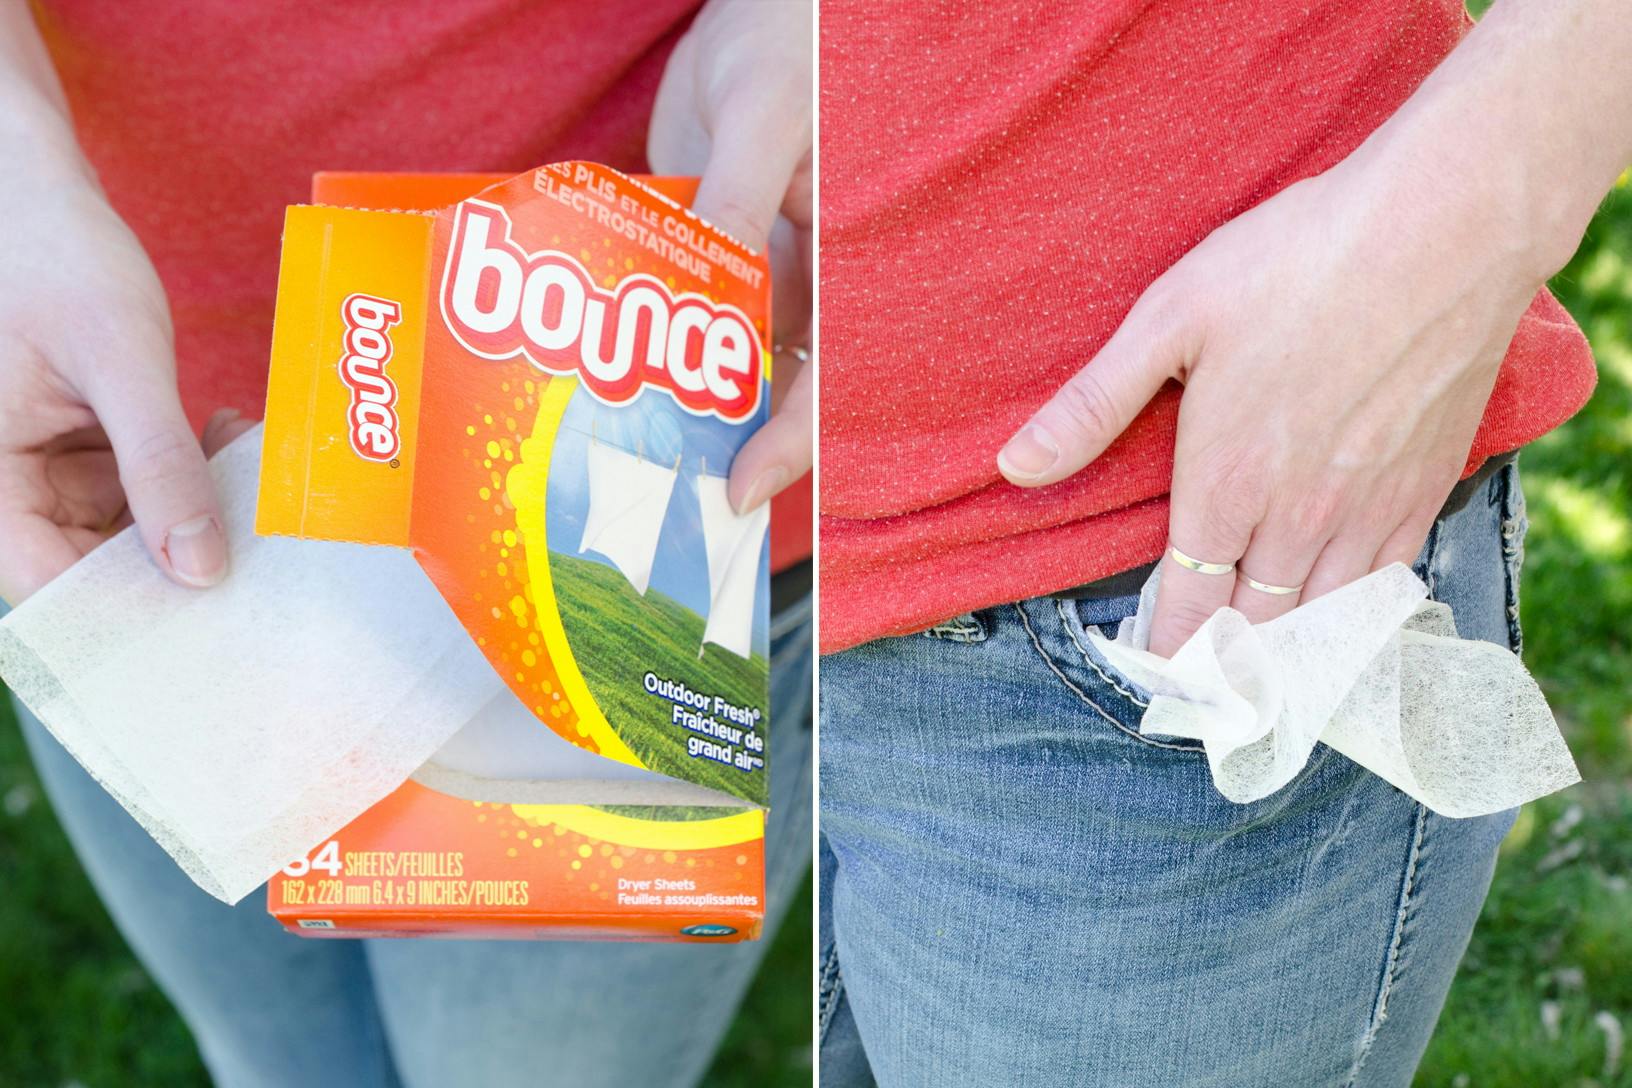 Someone pulling out Bounce dryer sheets and sticking them in her pocket as insect repellent.